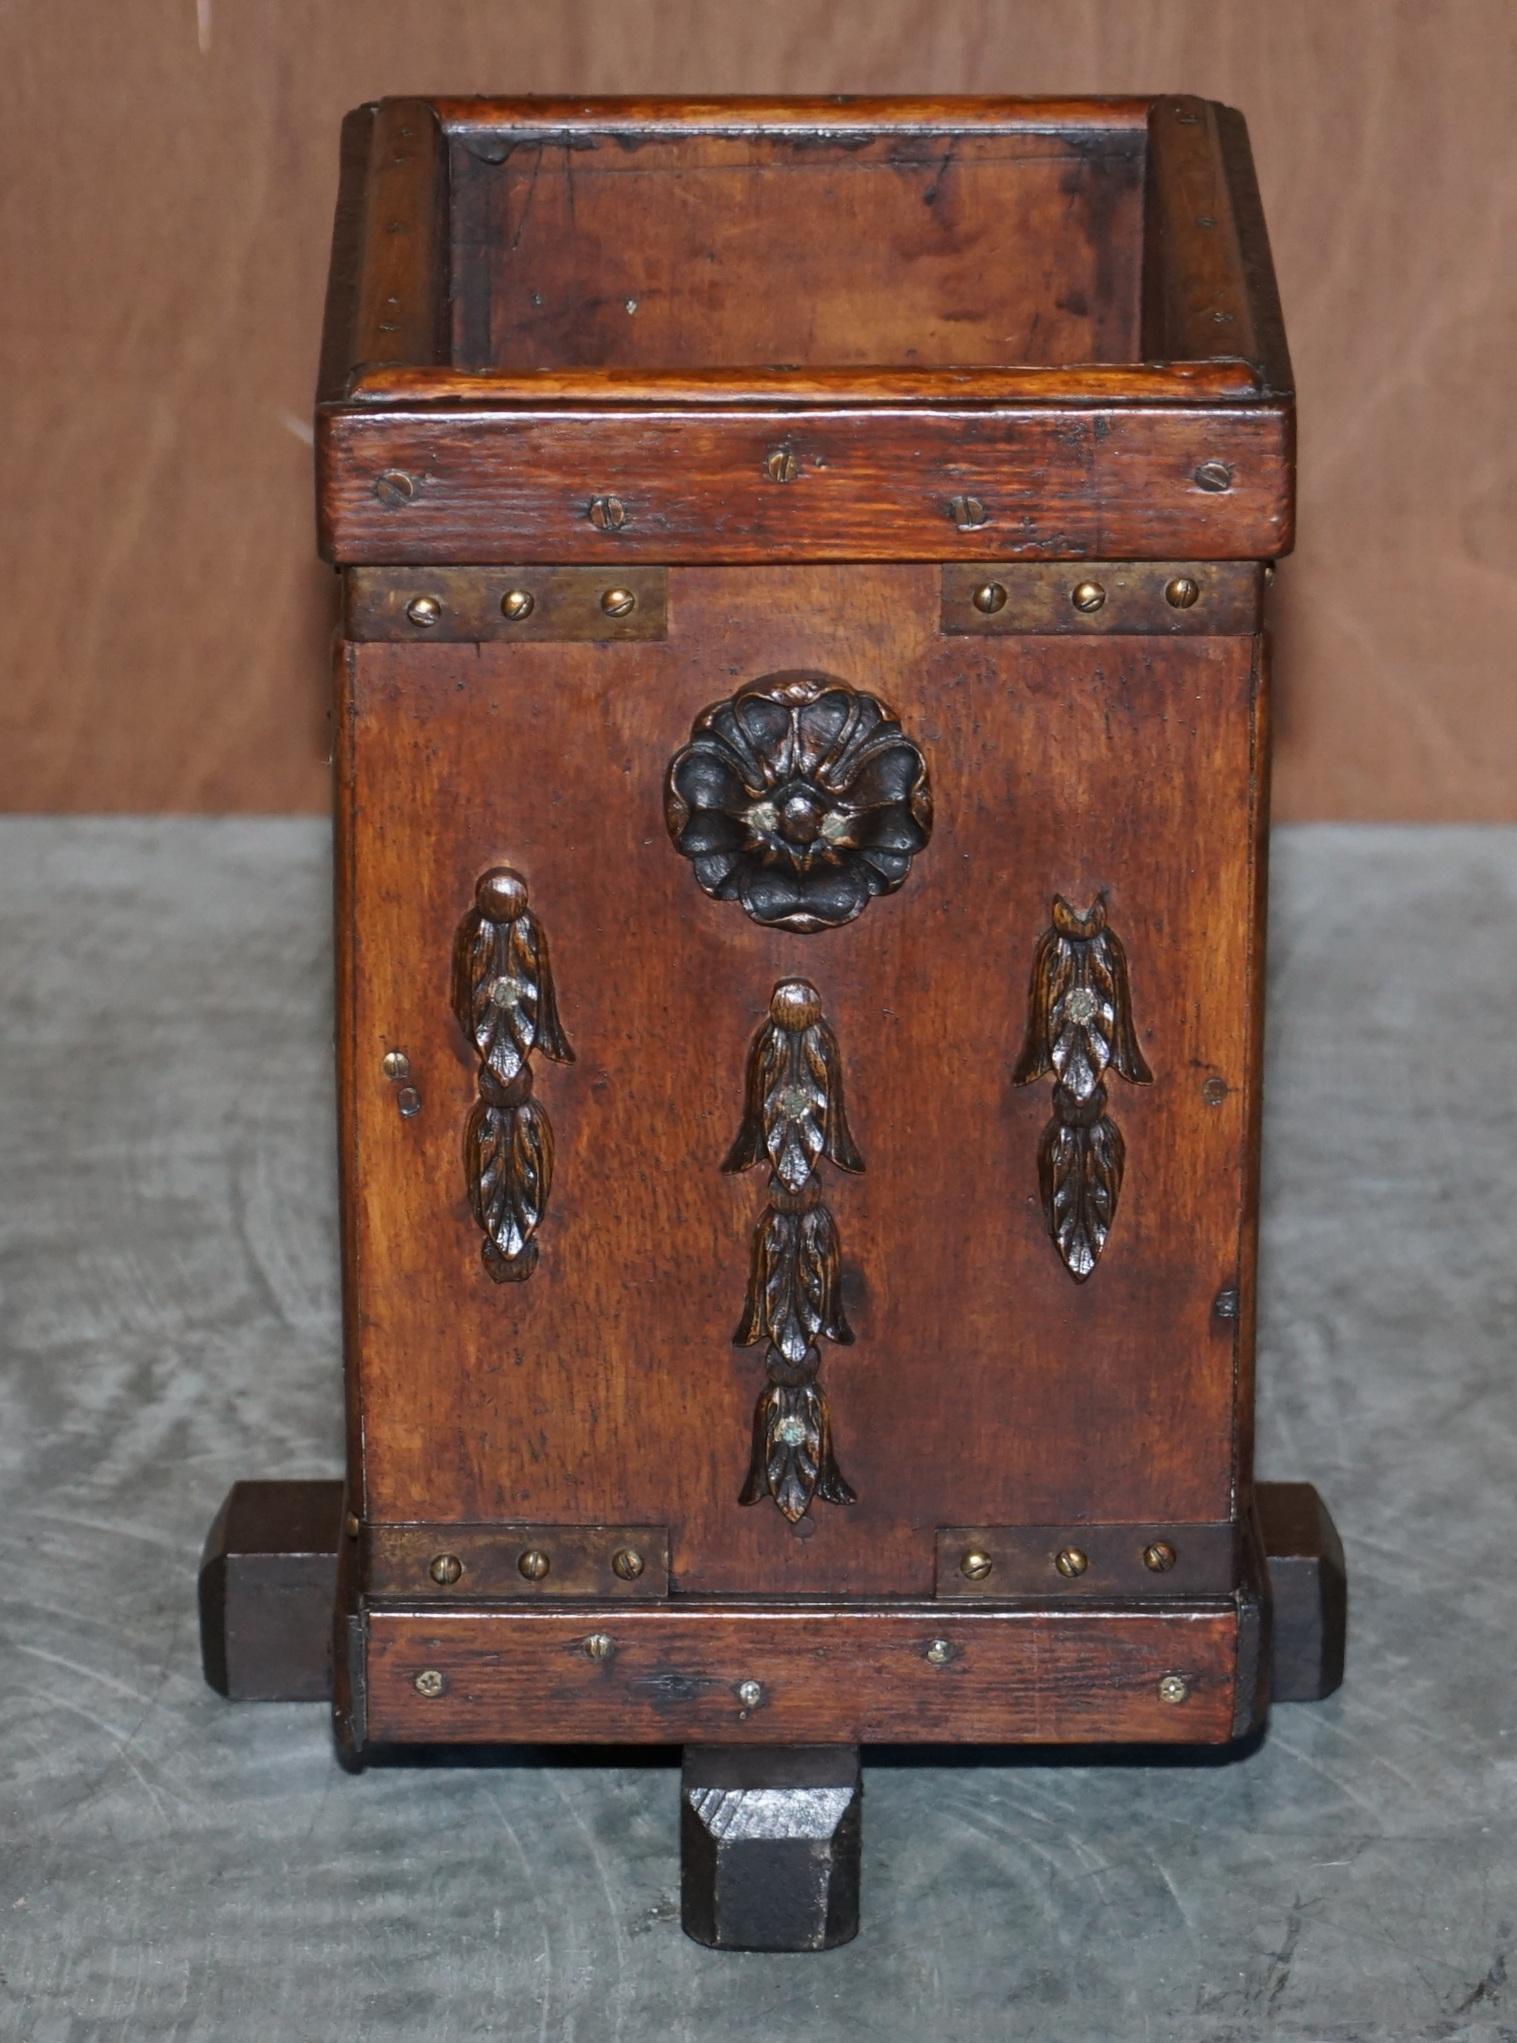 We are delighted to offer for sale this lovely Victorian hand carved English oak wastepaper bin

A very well made and decorative piece, it looks smart and elegant in any setting

The condition is very good indeed, the timber has a lovely rich